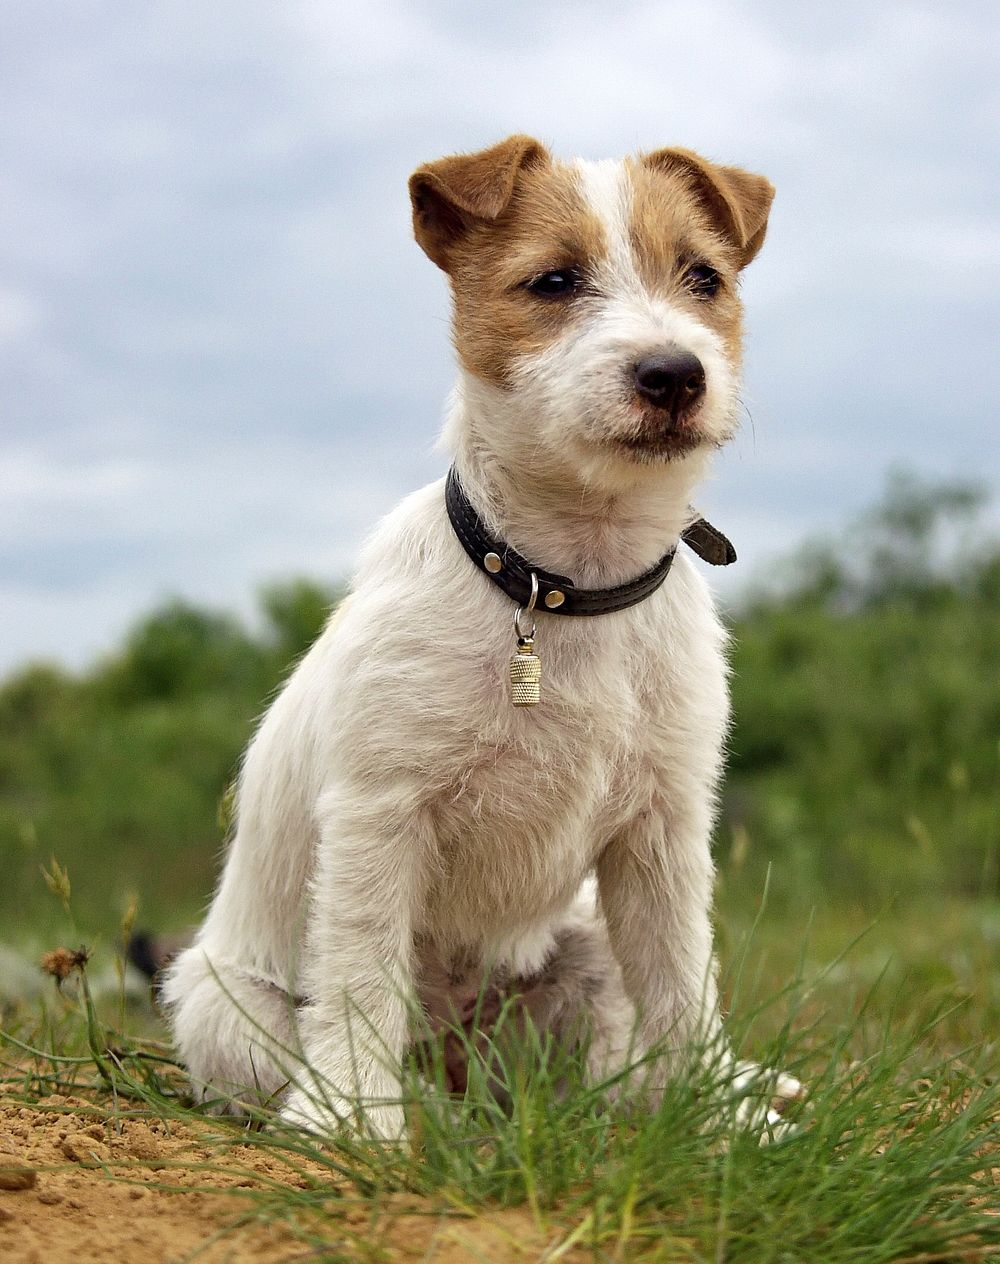 Puppy of Jack Russell Terrier. Original public domain image from Wikimedia Commons